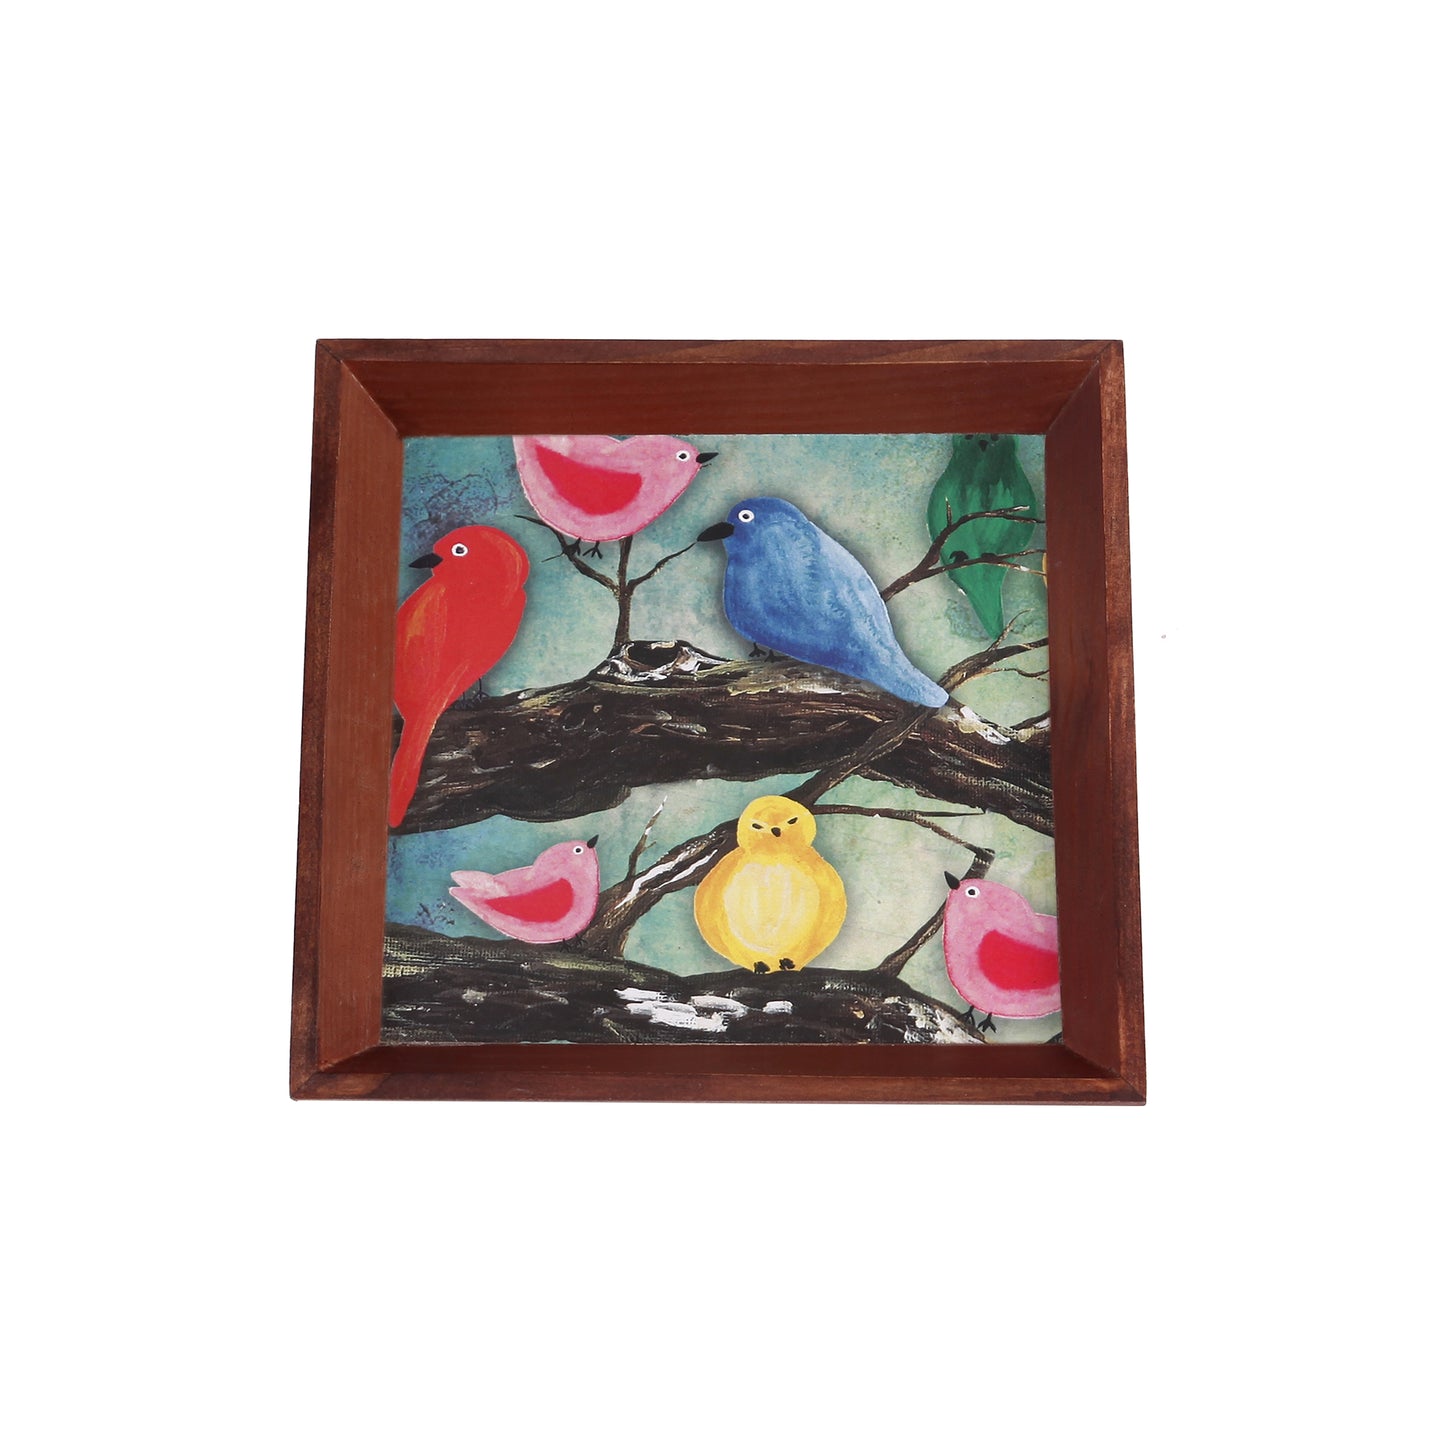 A Tiny Mistake Birds on a Branch Small Square Wooden Serving Tray, 18 x 18 x 2 cm